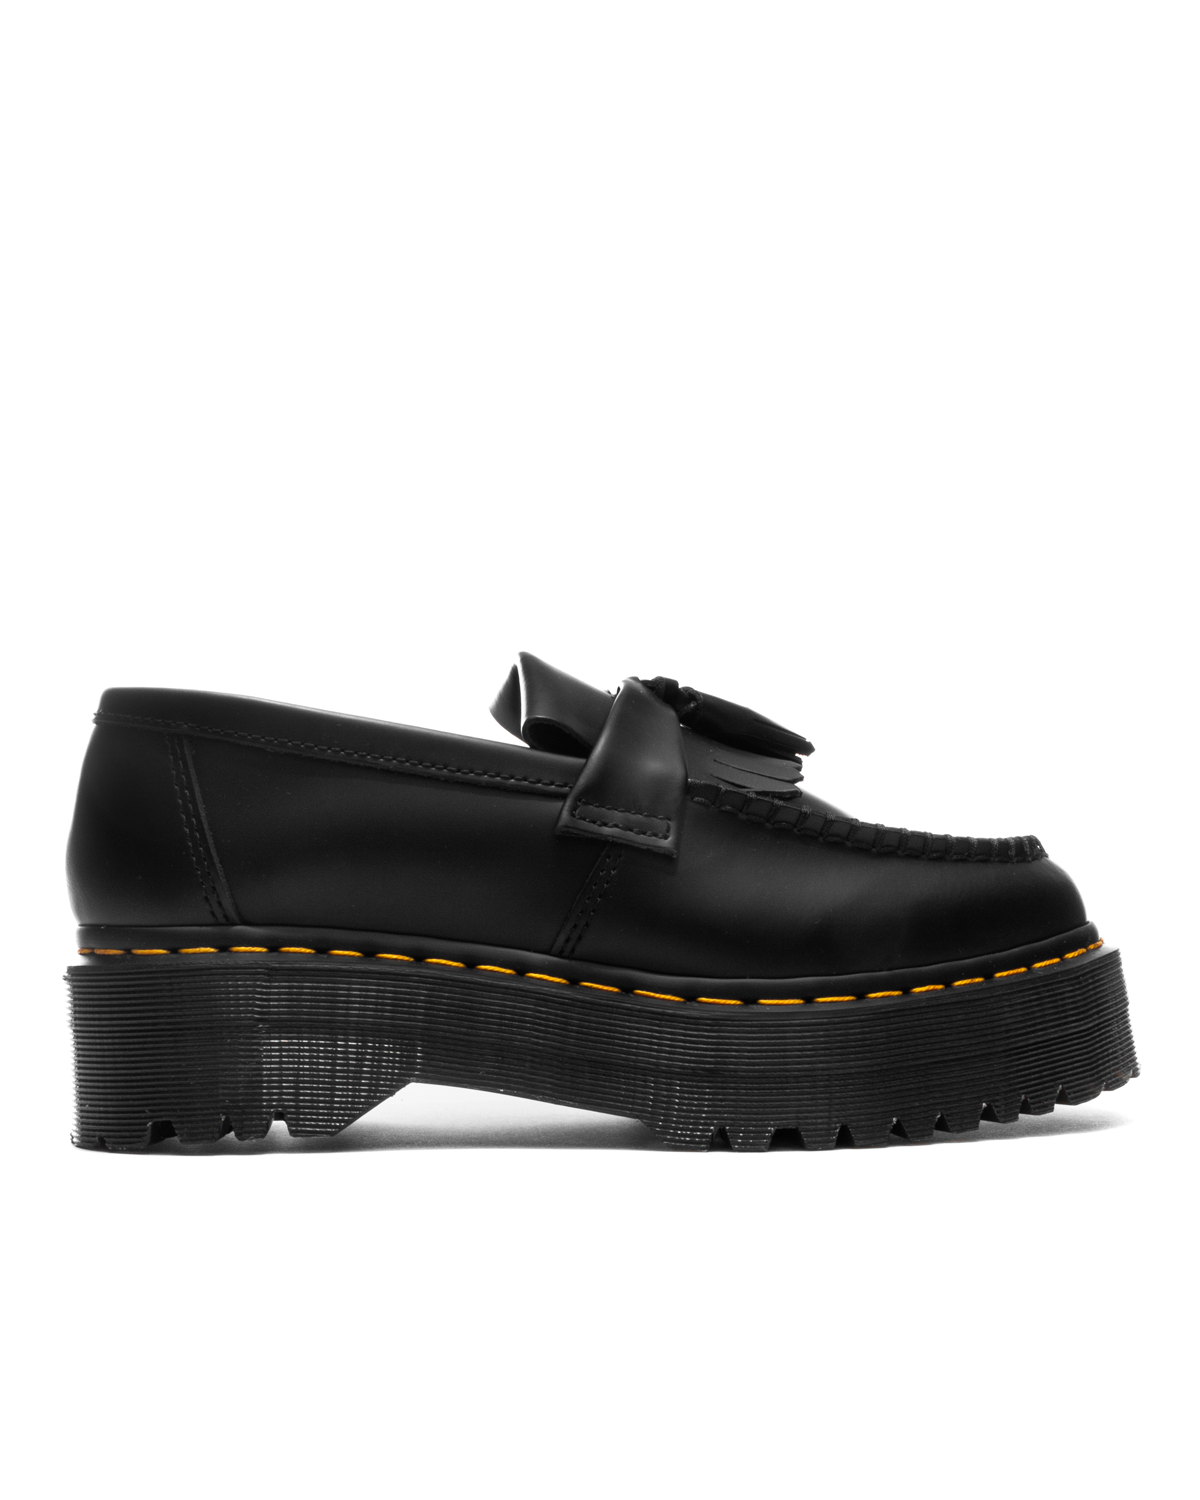 Asymmetrical black boots with an Agnus block - KeeShoes